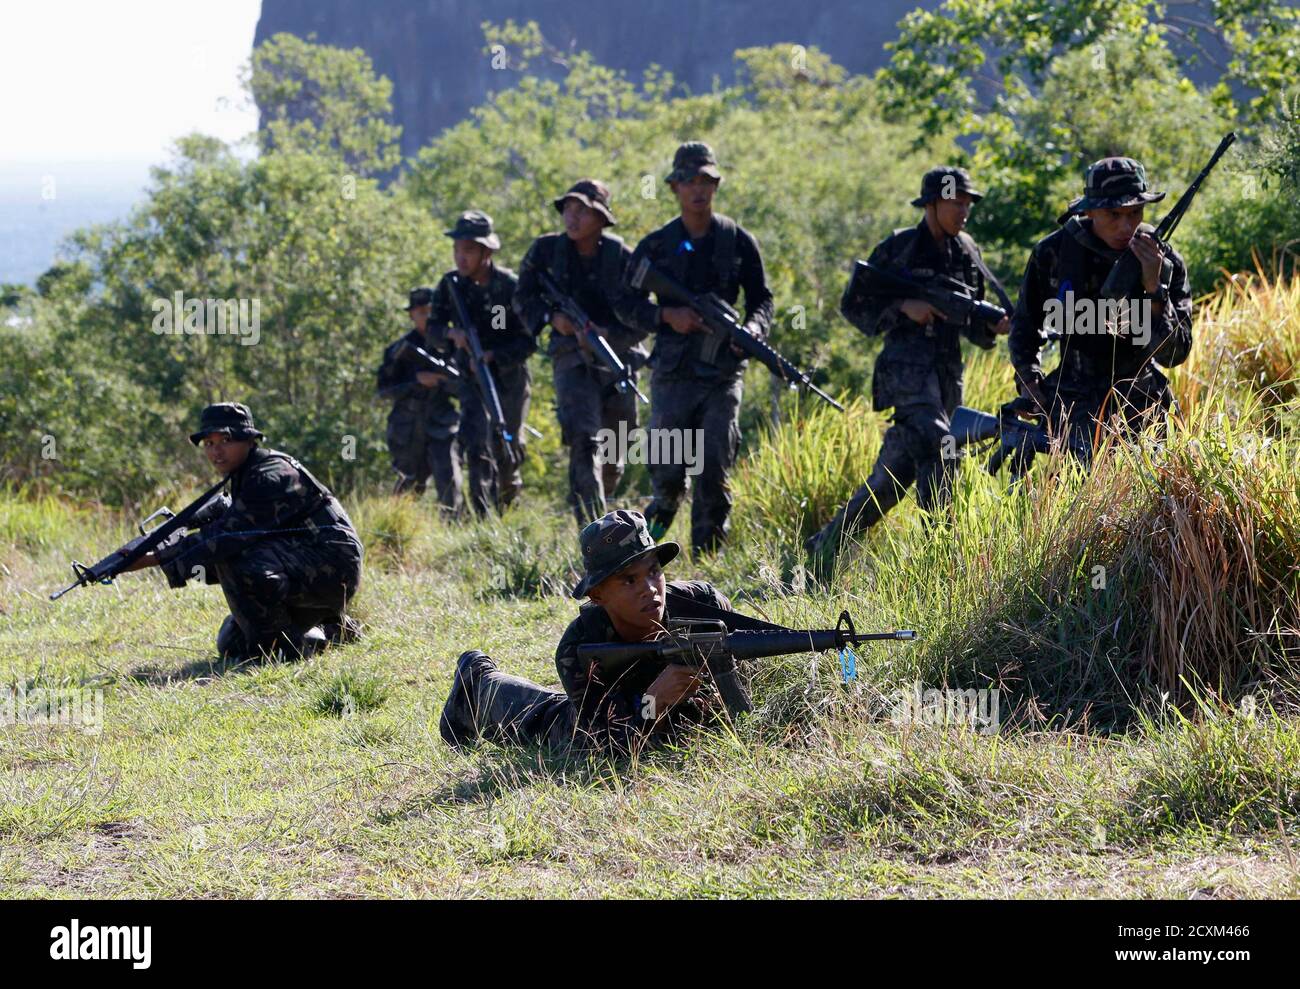 cadets-of-the-philippine-military-academy-pma-position-for-assault-during-a-joint-field-training-exercise-at-the-marines-headquarters-in-ternate-cavite-city-south-of-manila-may-29-2013-future-military-leaders-in-the-philippines-undergo-annual-drills-at-a-marine-base-to-train-them-on-coastal-defense-and-amphibious-operations-as-philippine-shifts-security-policy-from-fighting-rebels-to-defending-territories-in-disputed-waters-in-south-china-sea-reutersromeo-ranoco-philippines-tags-politics-military-2CXM466.jpg